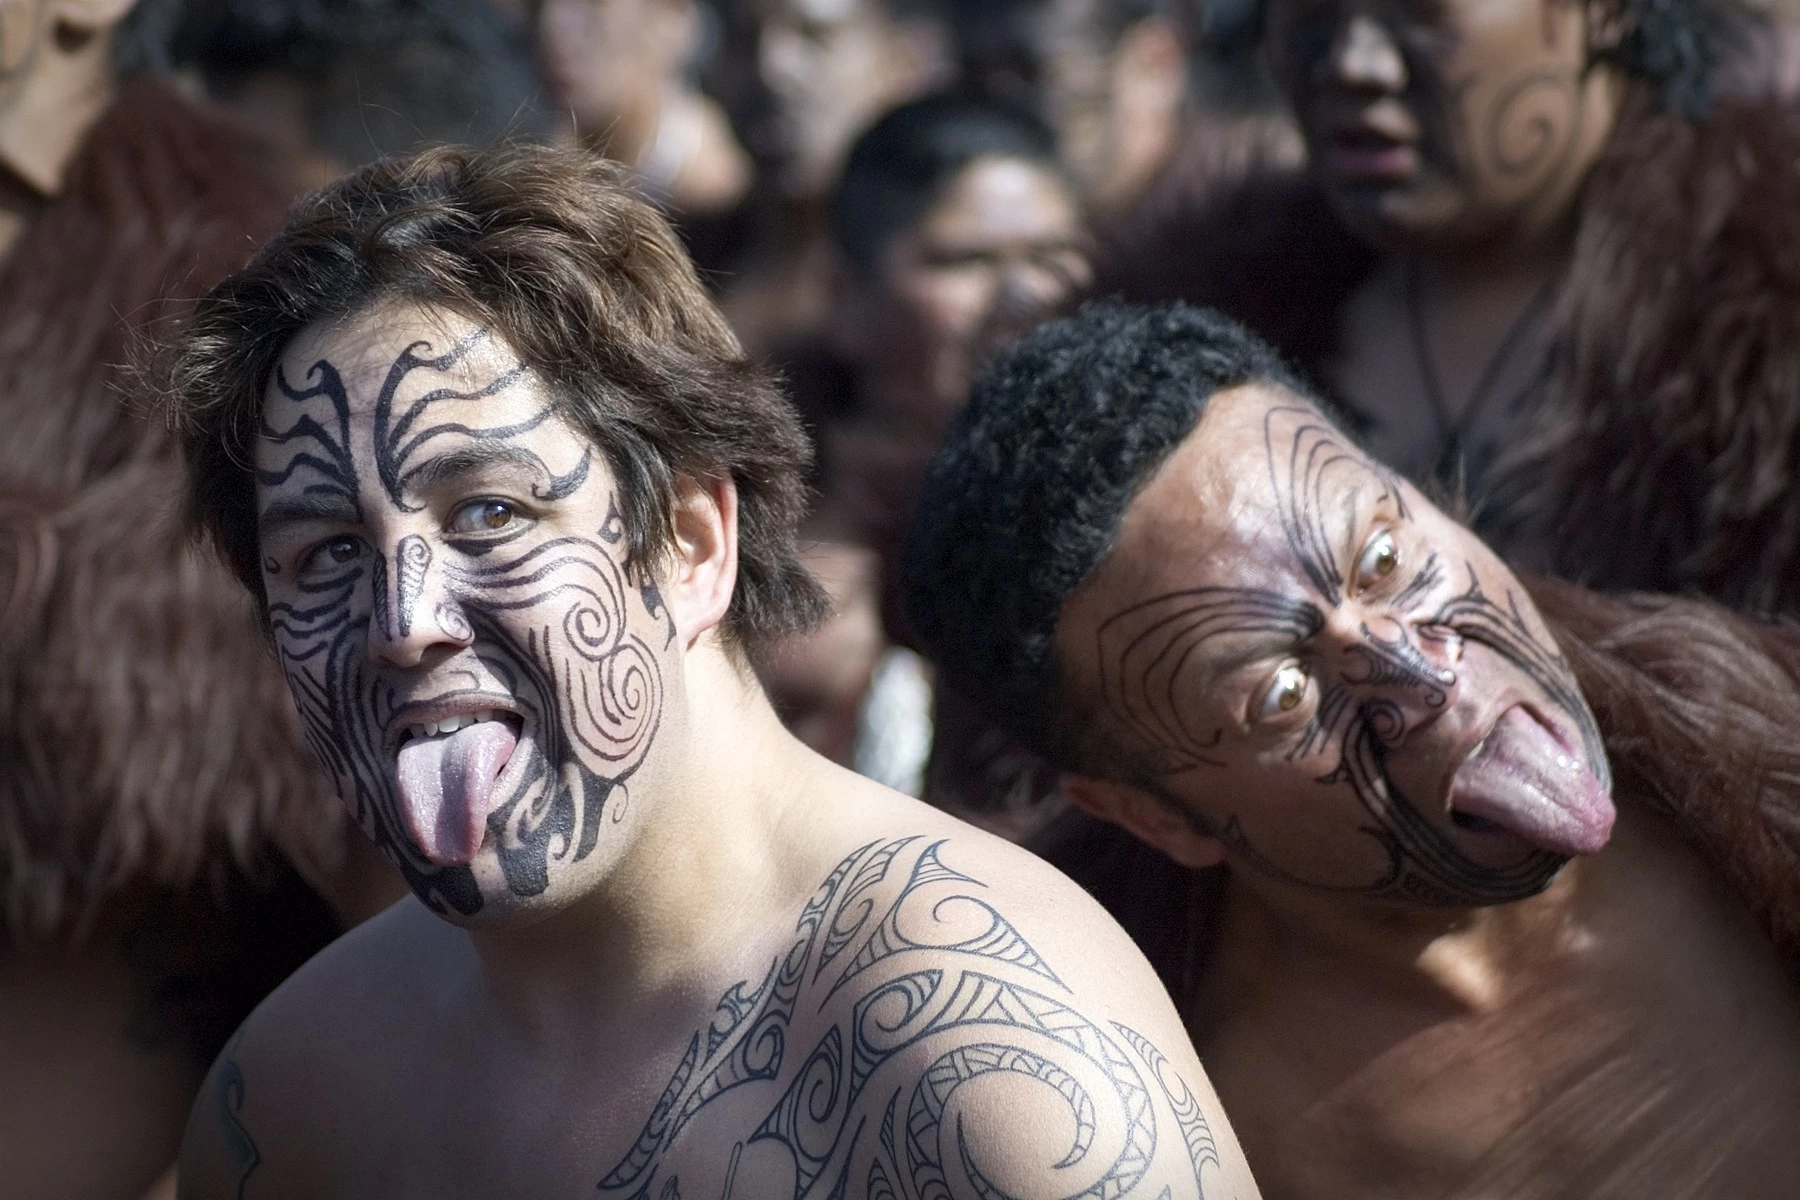 NZ's Māori Culture: Traditions and Indigenous Heritage